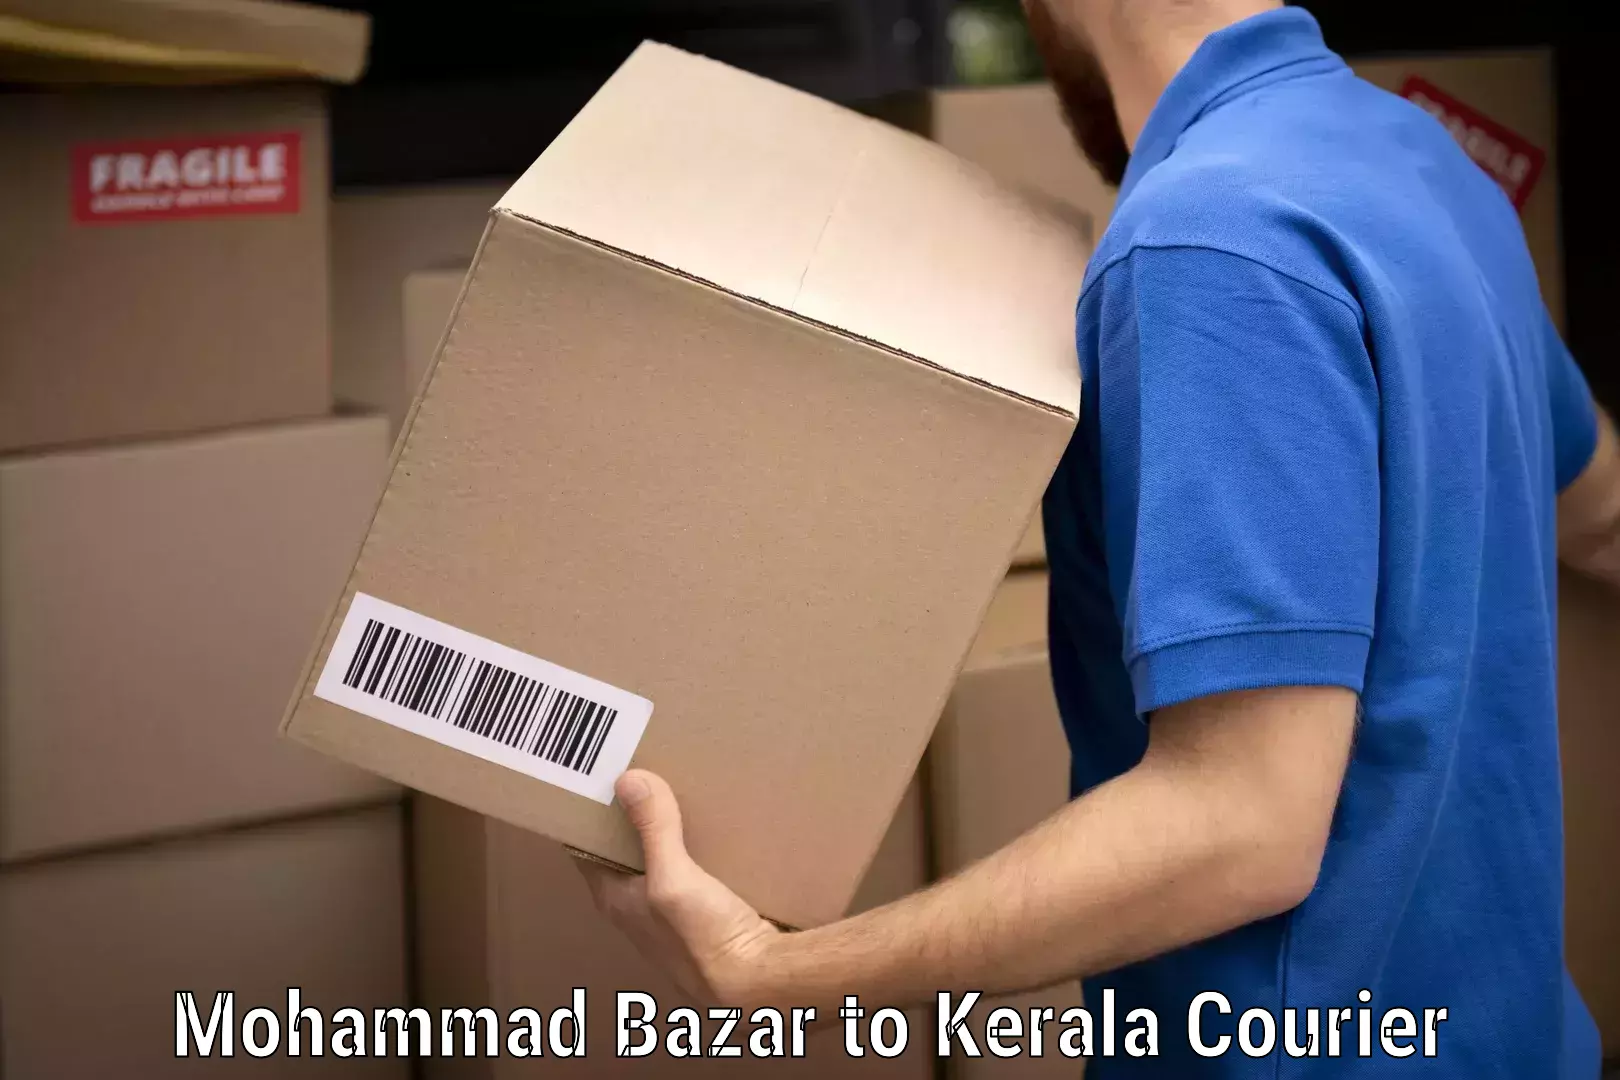 Furniture transport experts Mohammad Bazar to Kerala